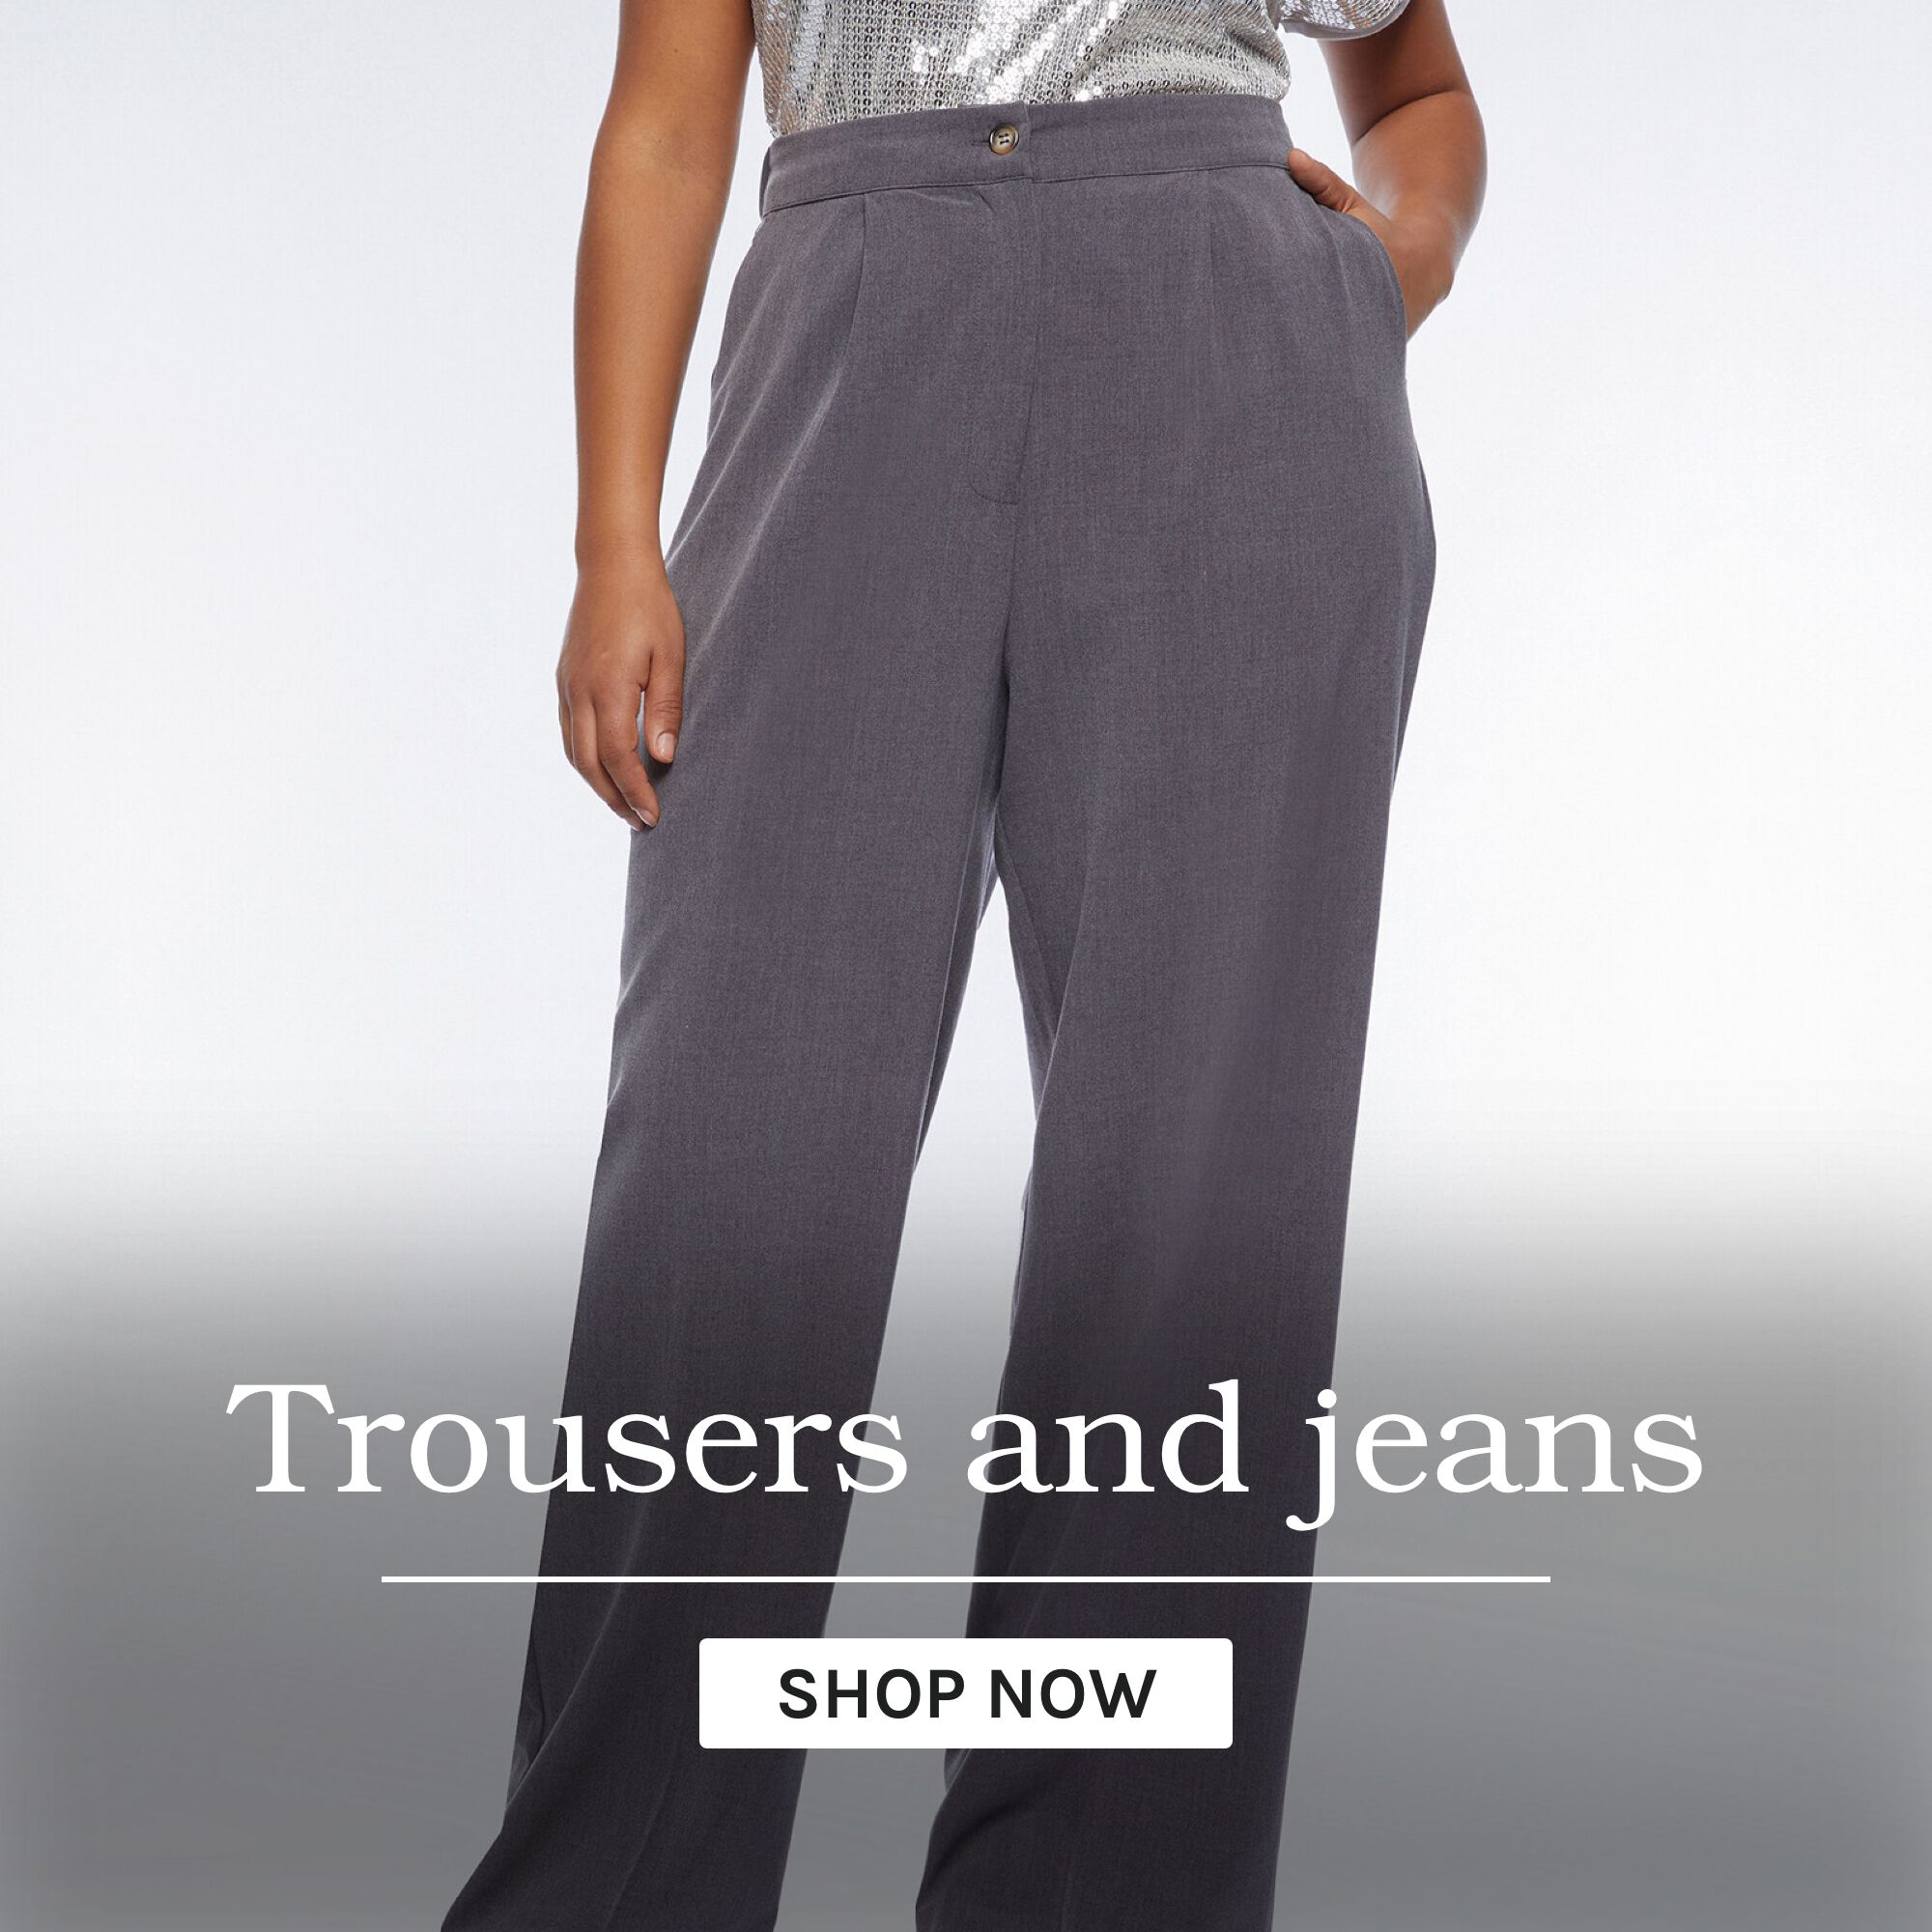 Trousers and jeans